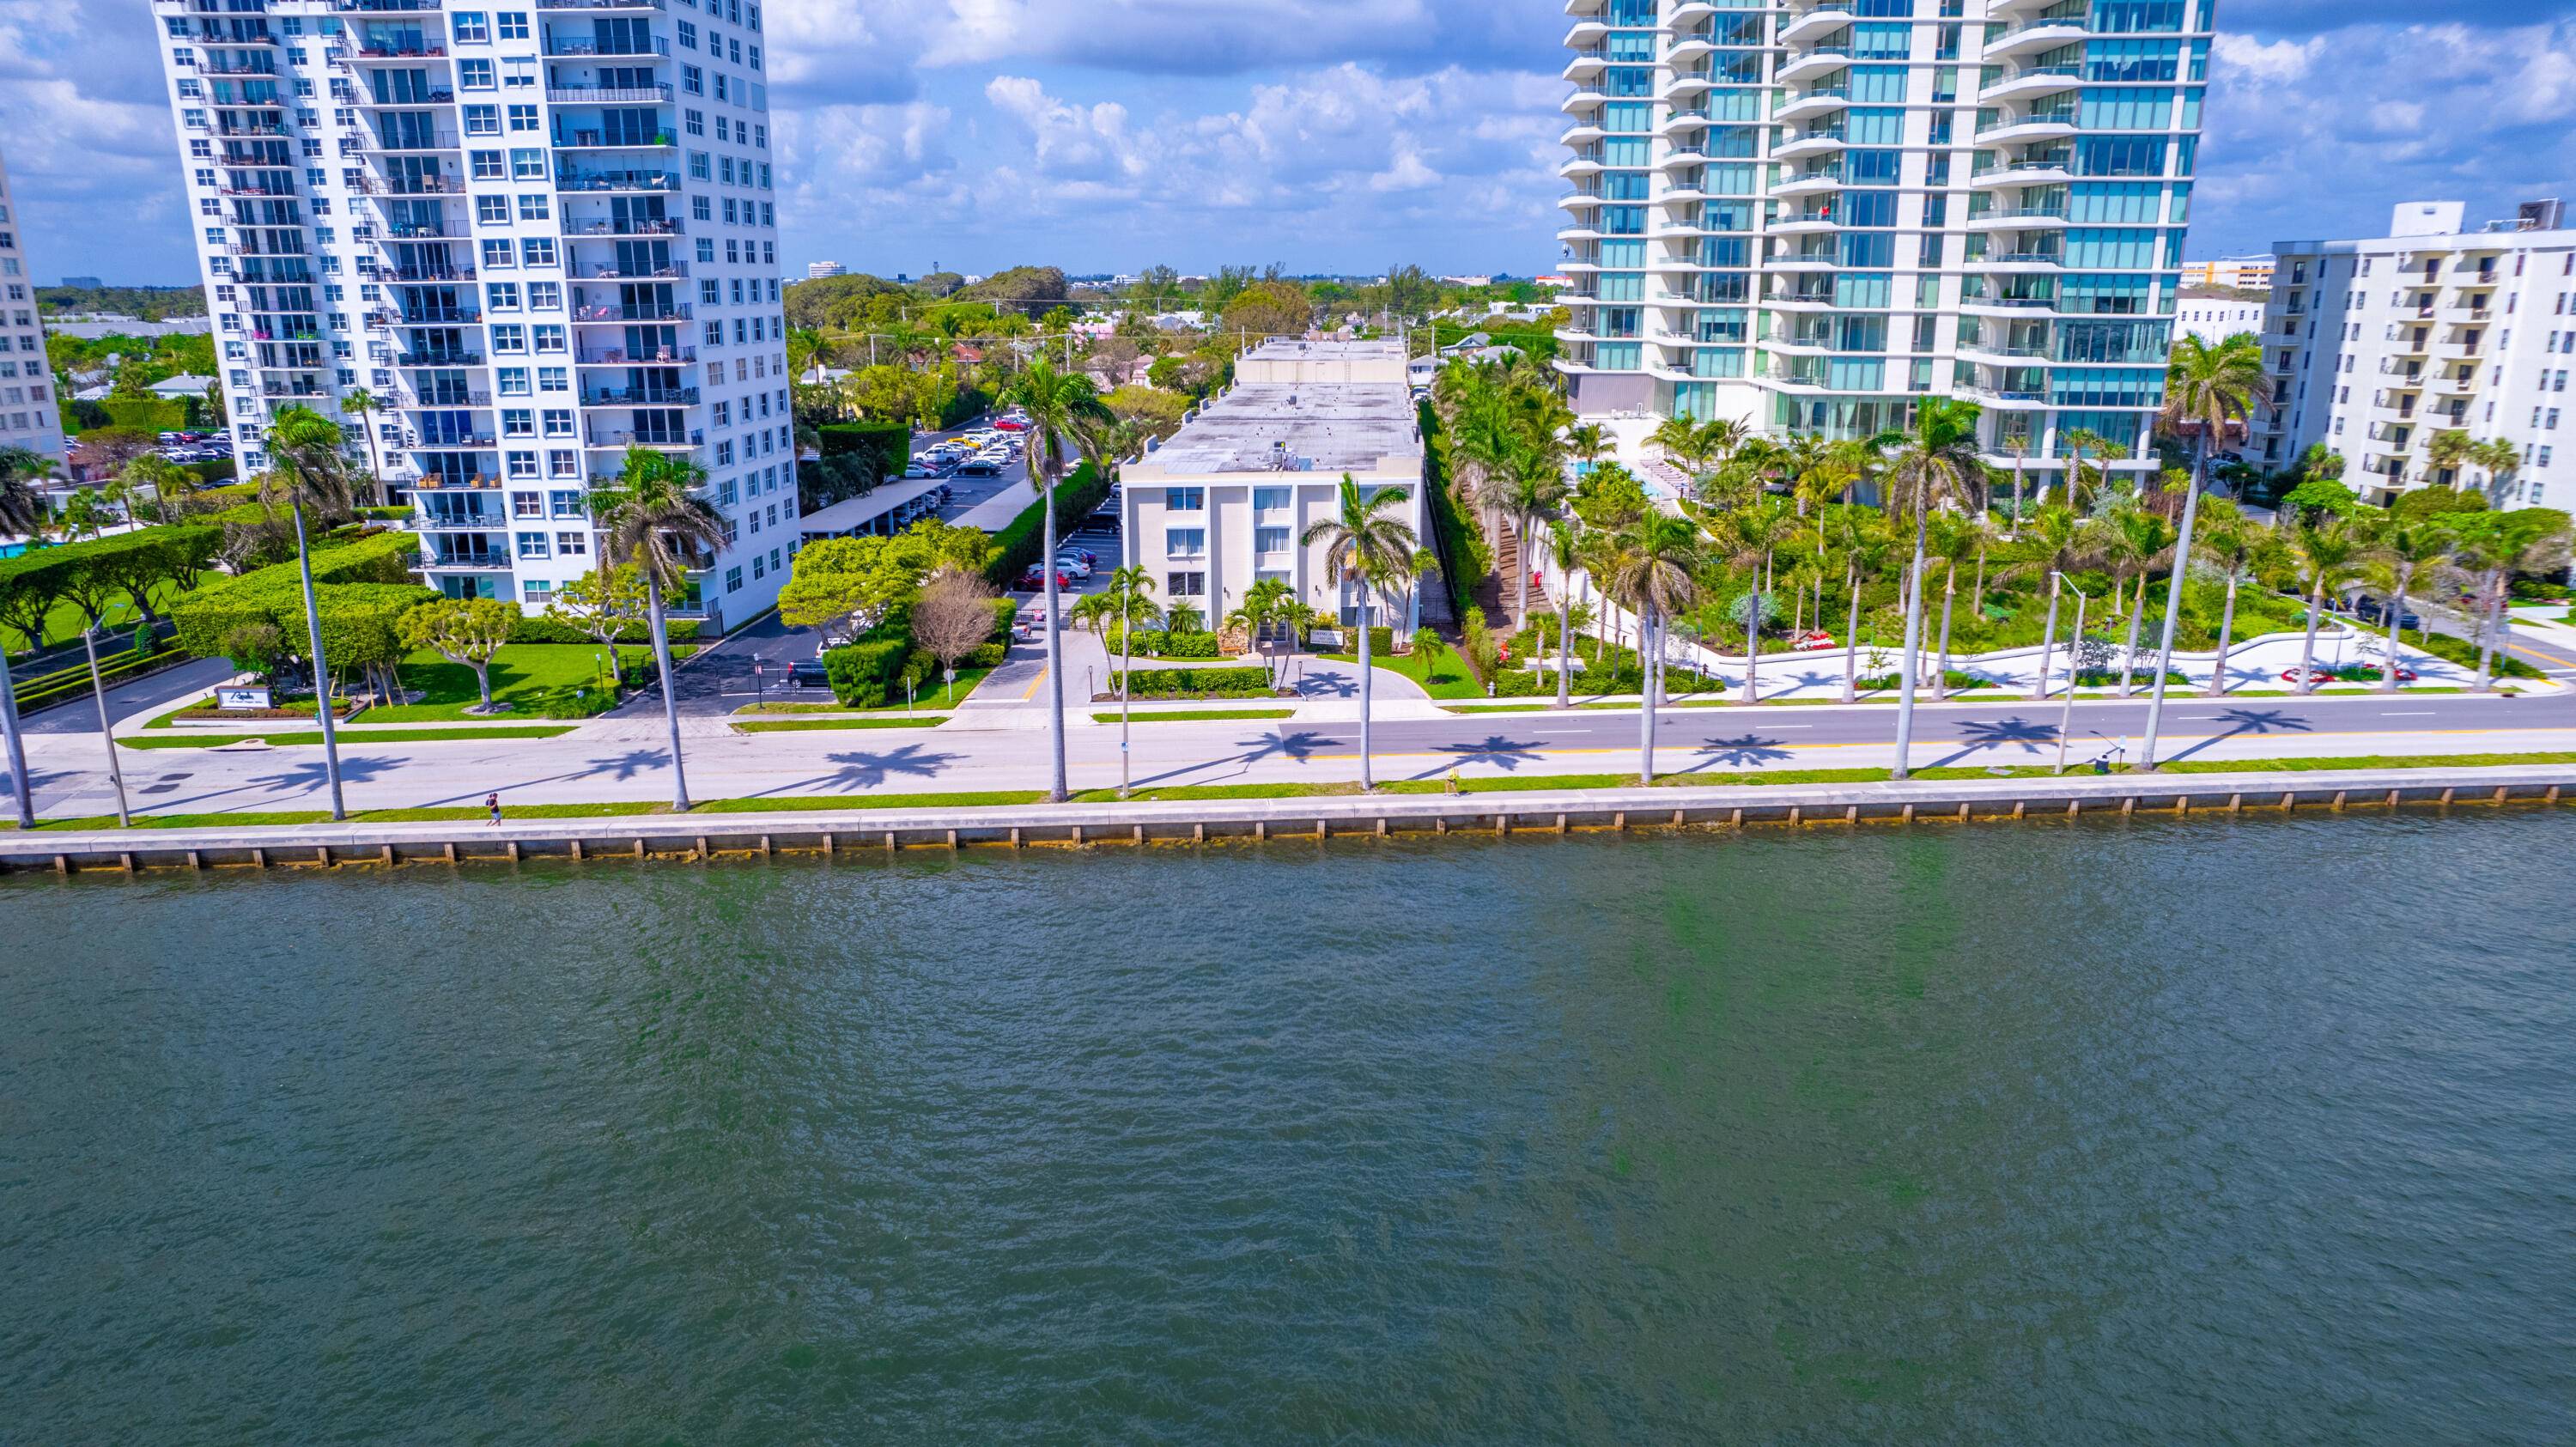 Boutique Building in a superb location across the street from the Intracoastal waterway.